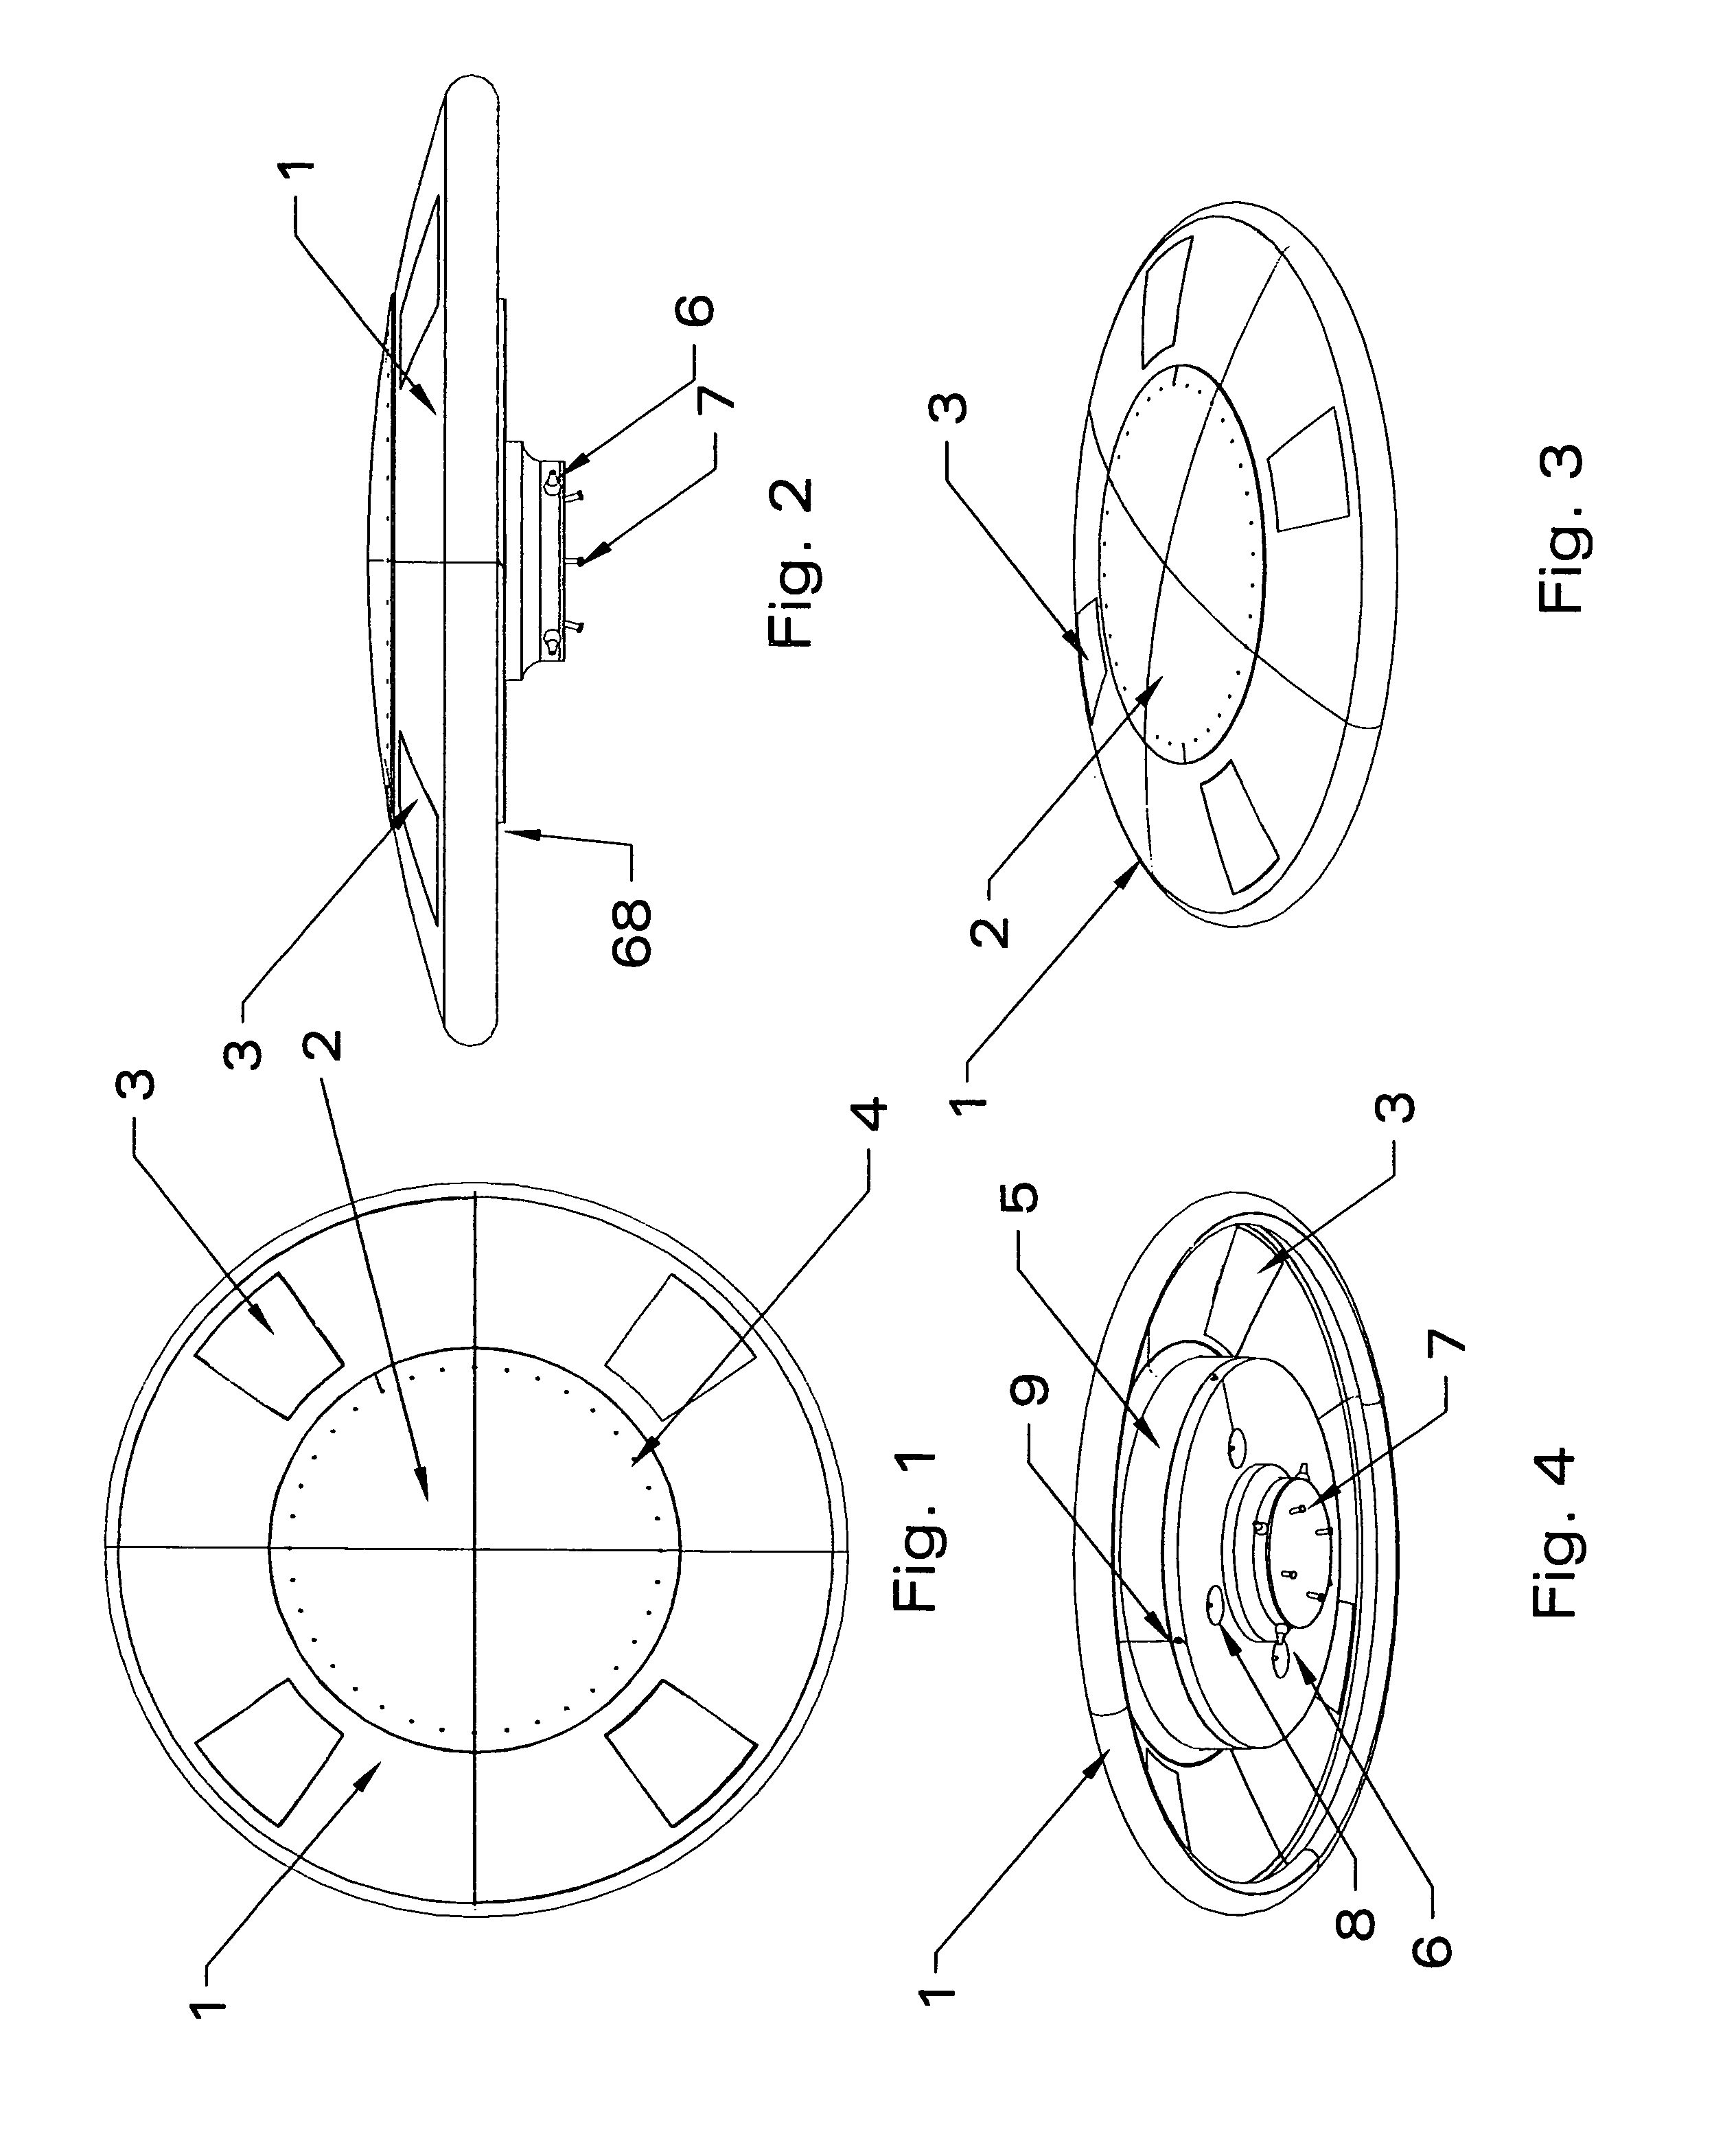 Saucer shaped gyroscopically stabilized vertical take-off and landing aircraft